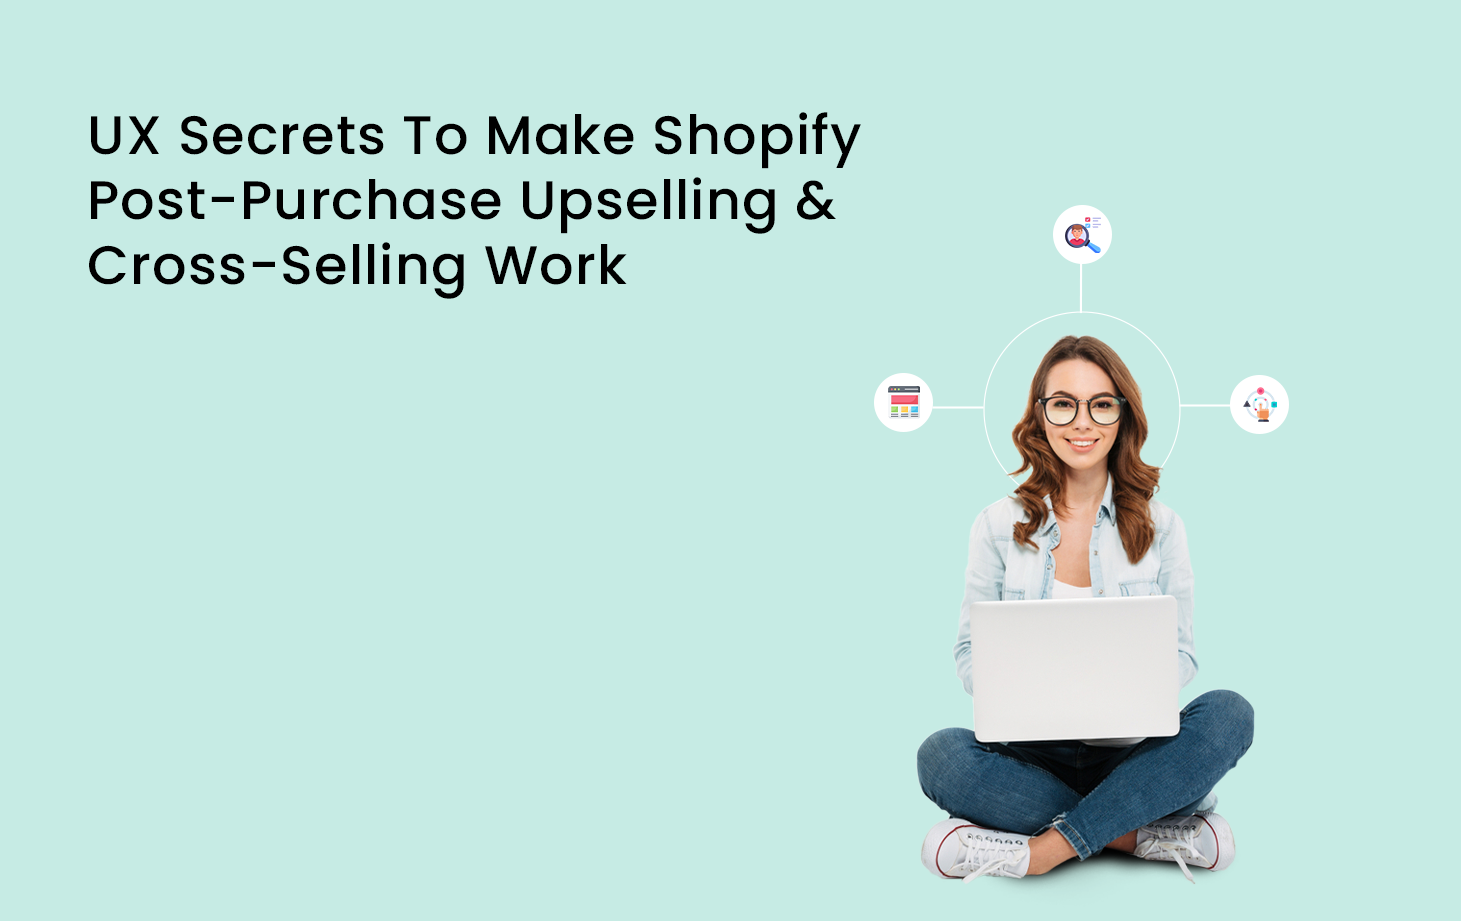 UX Tips To Make Shopify Post-Purchase Upselling & Cross-Selling Work